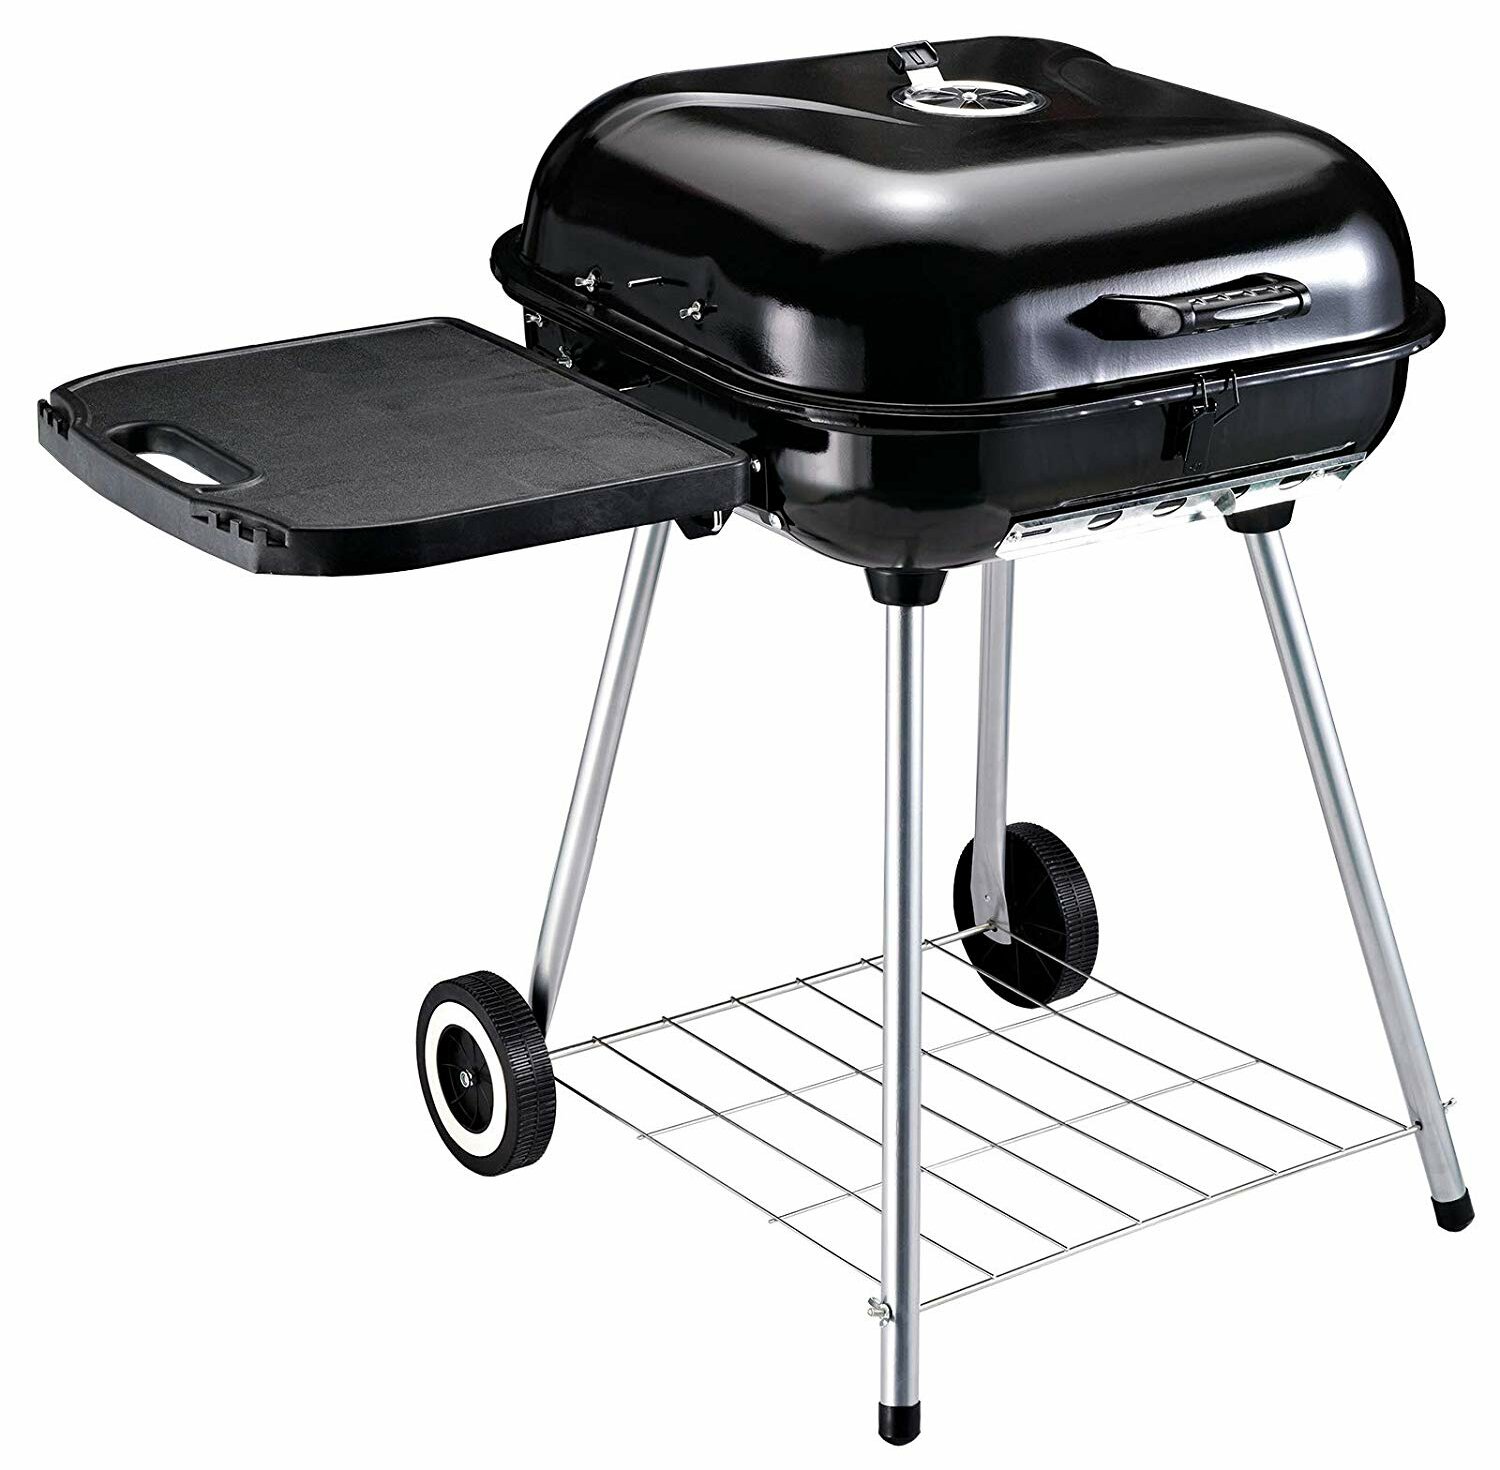 Bbq kettle Grill Charcoal camping outdoor Portable Small BackYard